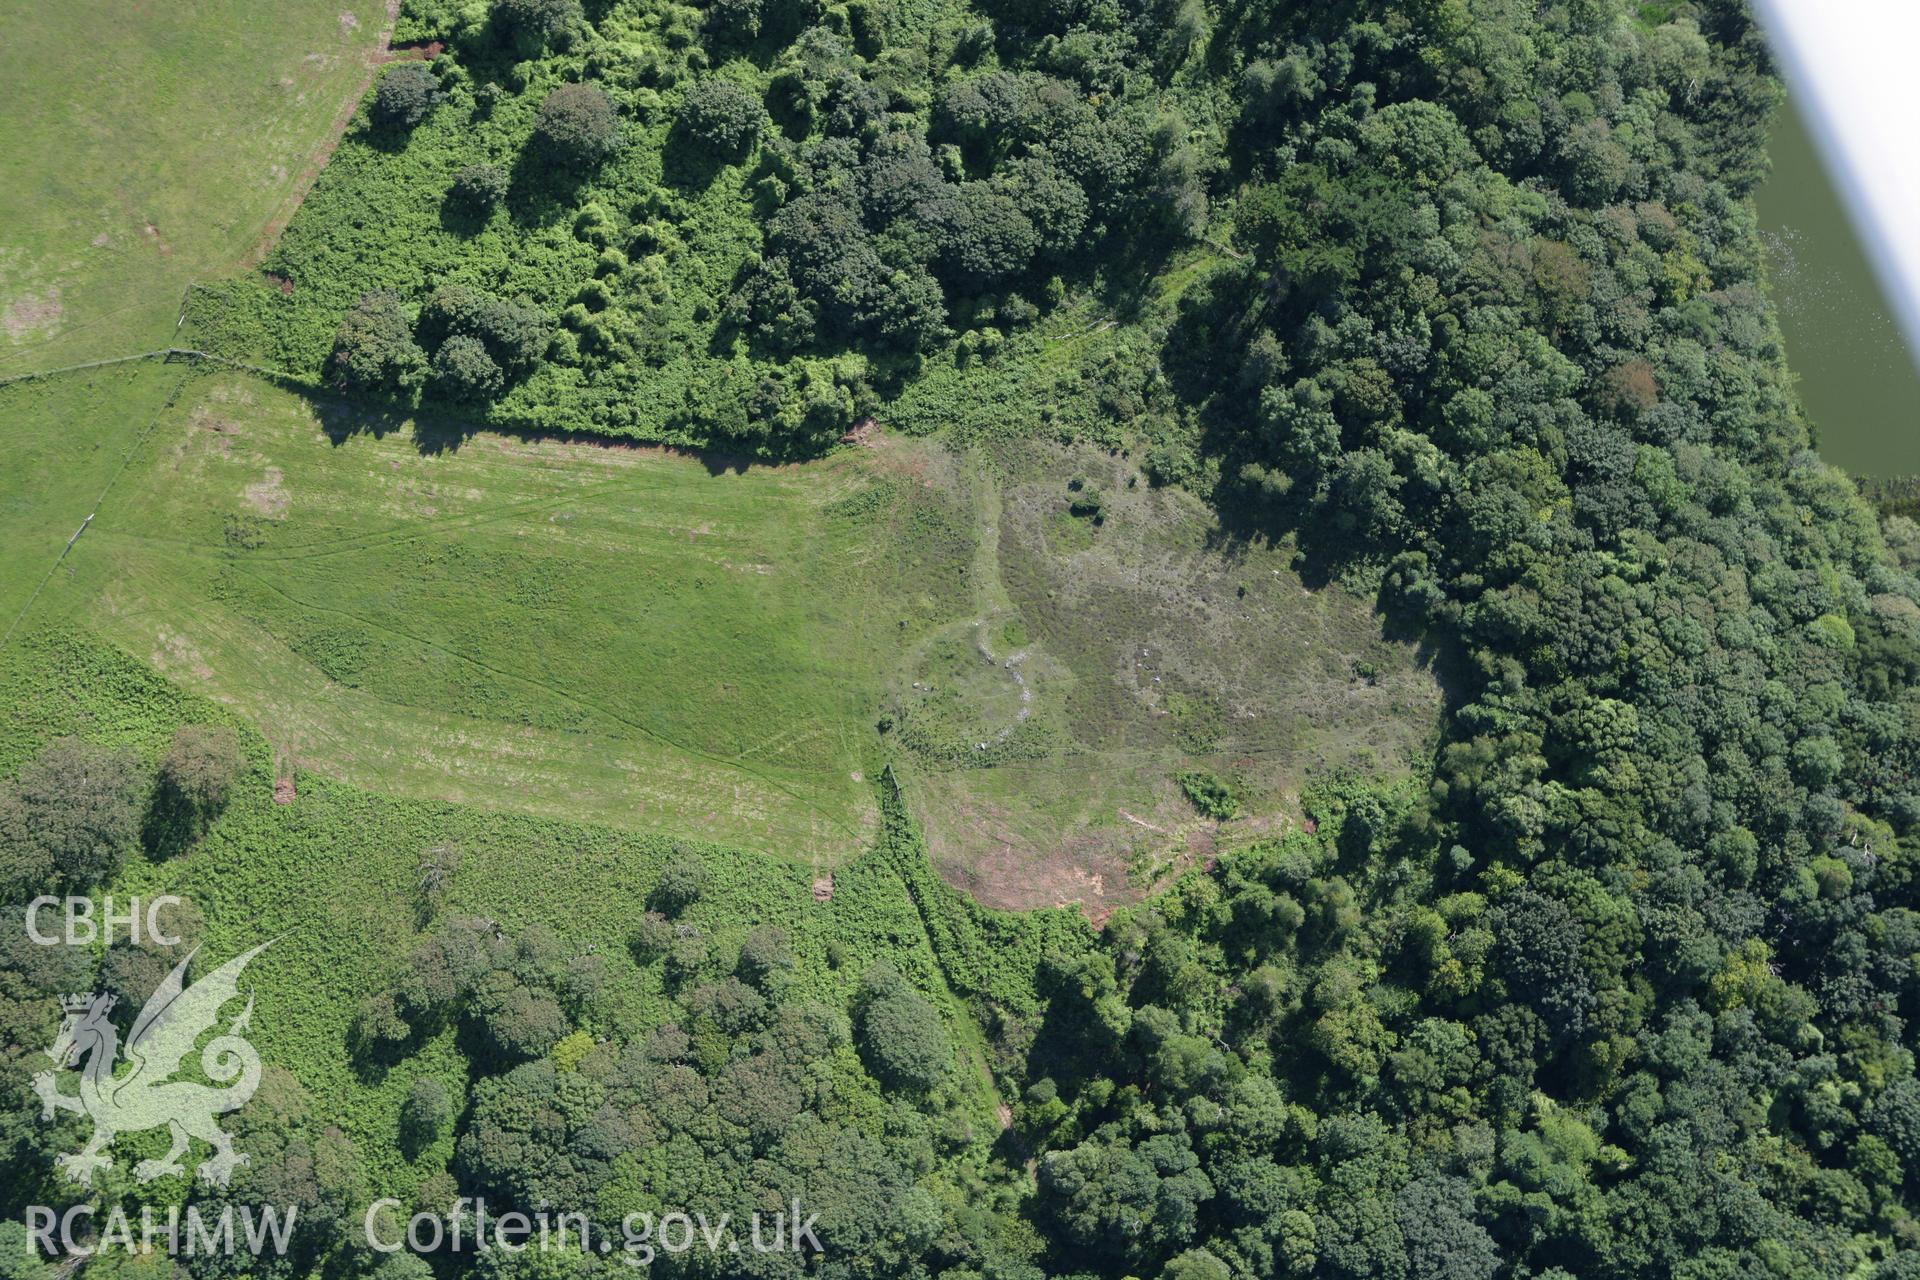 RCAHMW colour oblique aerial photograph of Stackpole Warren 'Ancient Village'. Taken on 30 July 2007 by Toby Driver